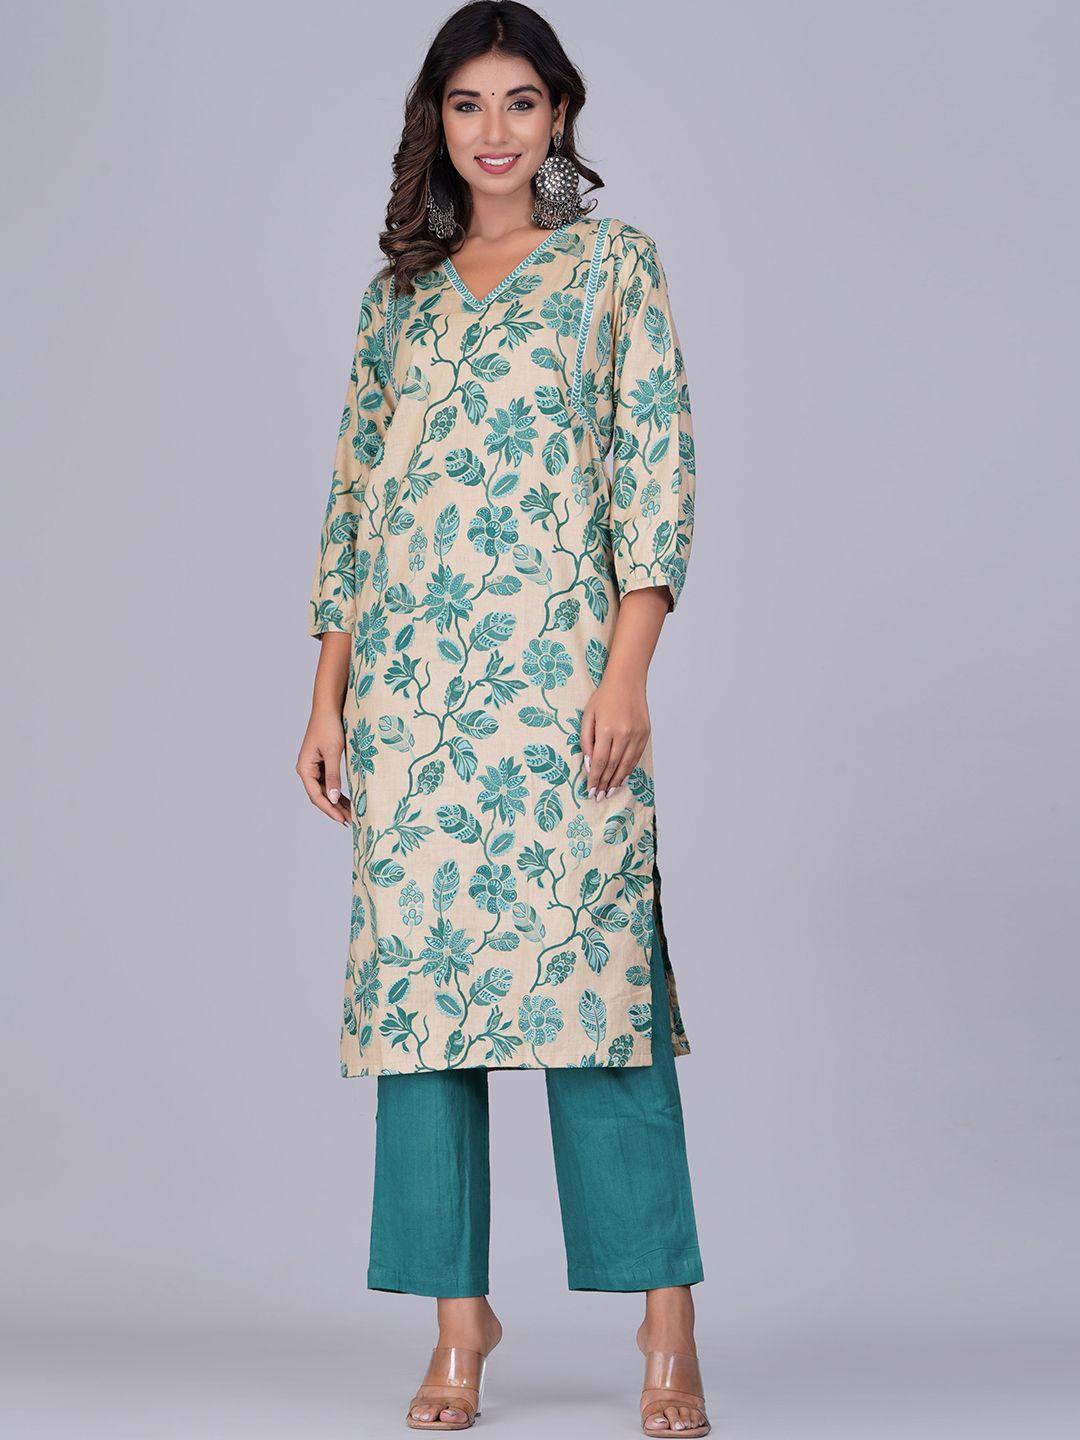 shikhaa style floral printed straight kurta with trousers